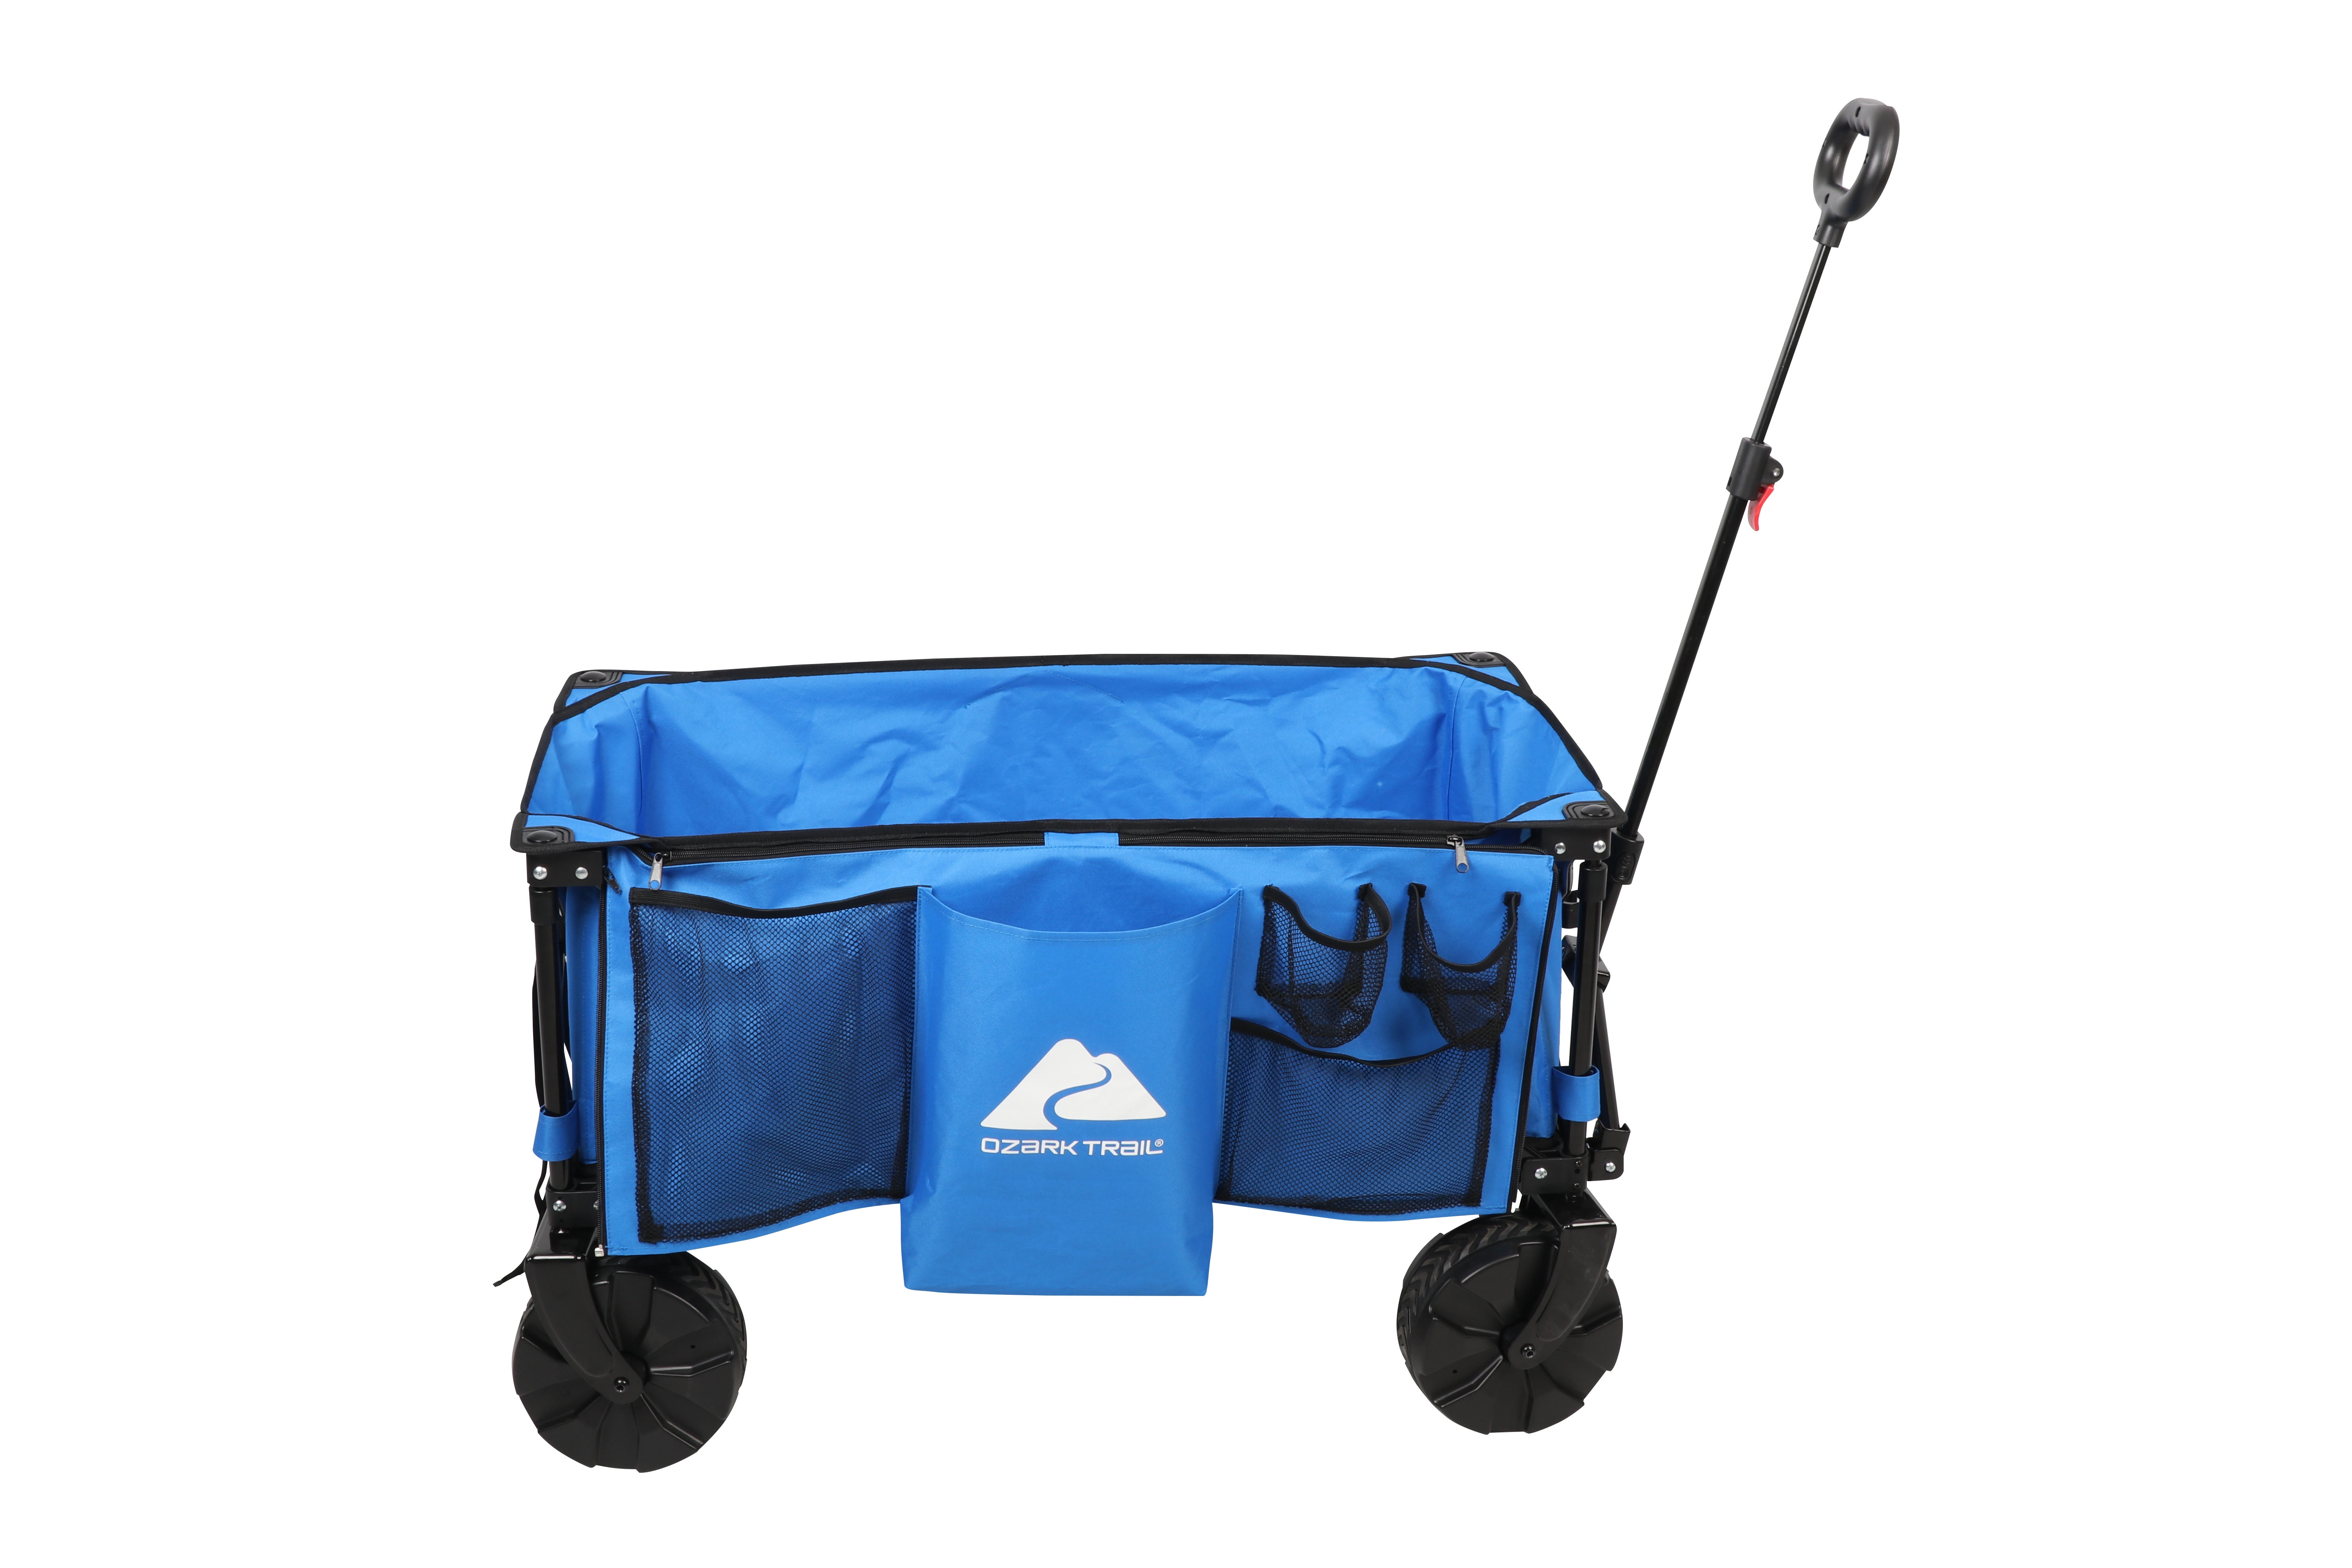 P/N: ET-TOOL038-BLUE Blue Multifunction Folding Wagon Cart Outdoor Portable Wheels for Utility,Camping,Grocery,Shopping,Kid Carry,Picnic,Beach,Garden HTTMT 